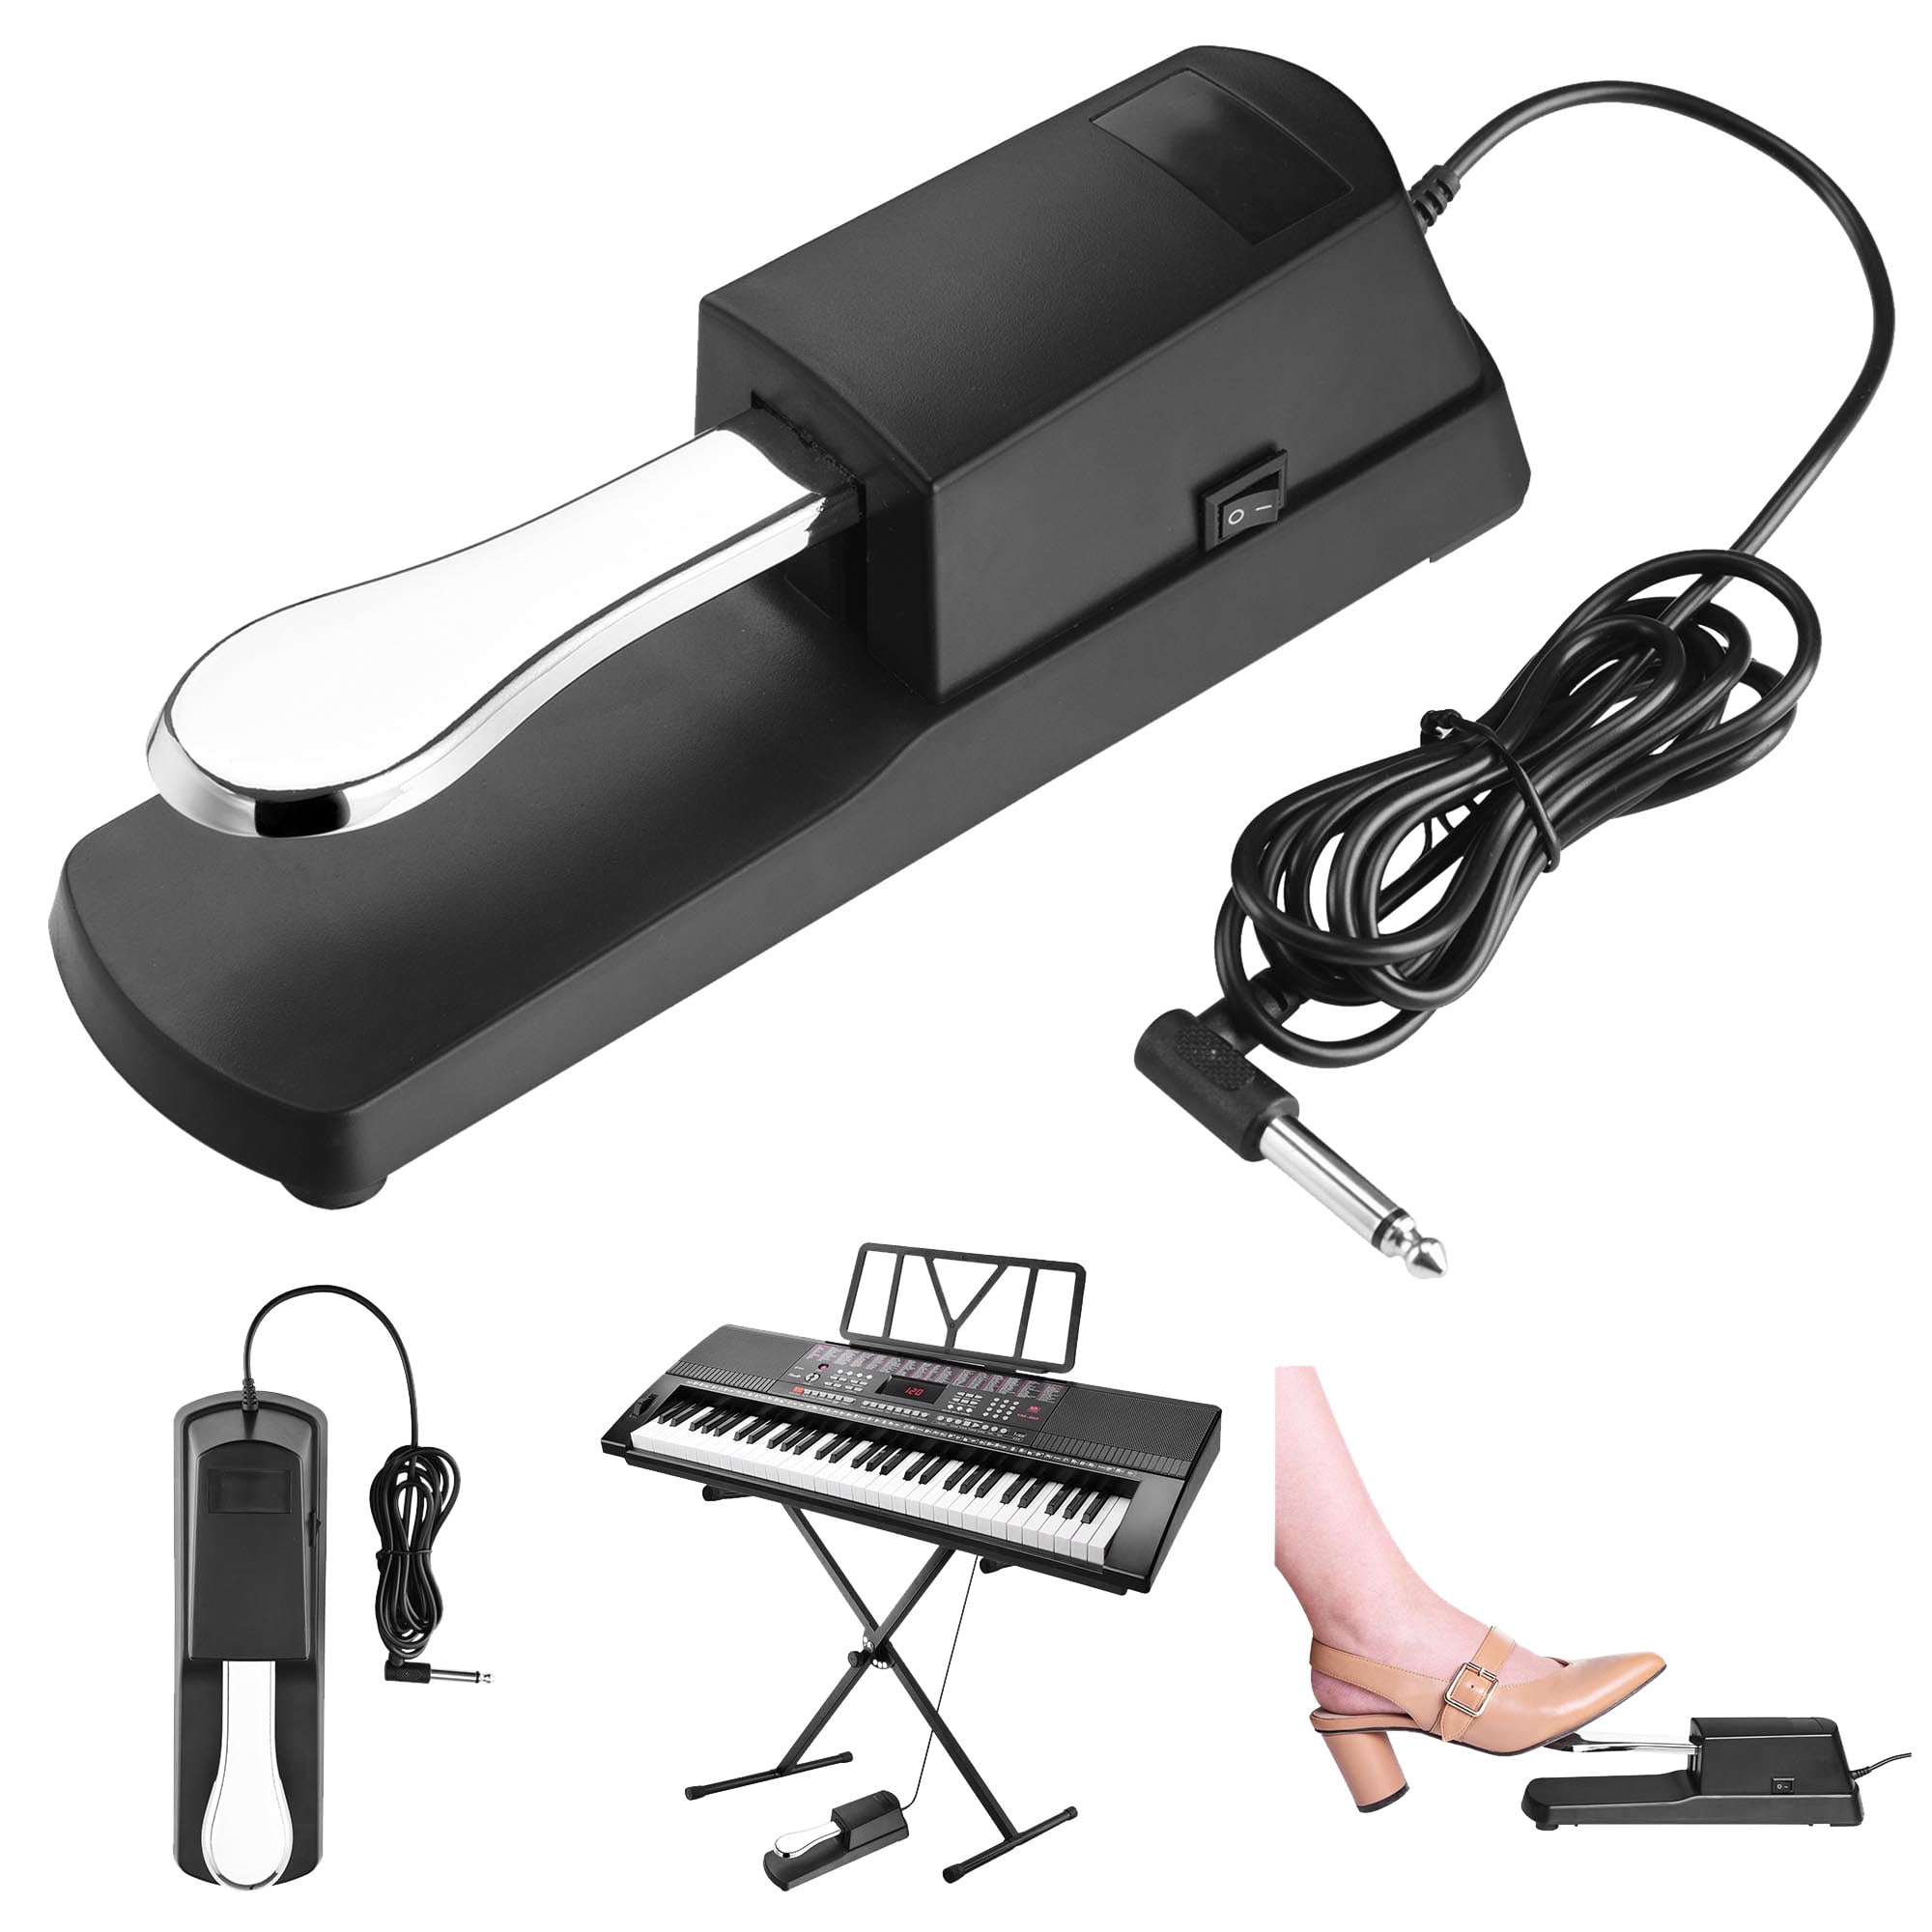 Sustain Pedal for Keyboard - Sovvid Piano Foot Pedal with Polarity Switch  for All Brands Electronic Keyboards, MIDI Keyboards, Digital Pianos,  Yamaha